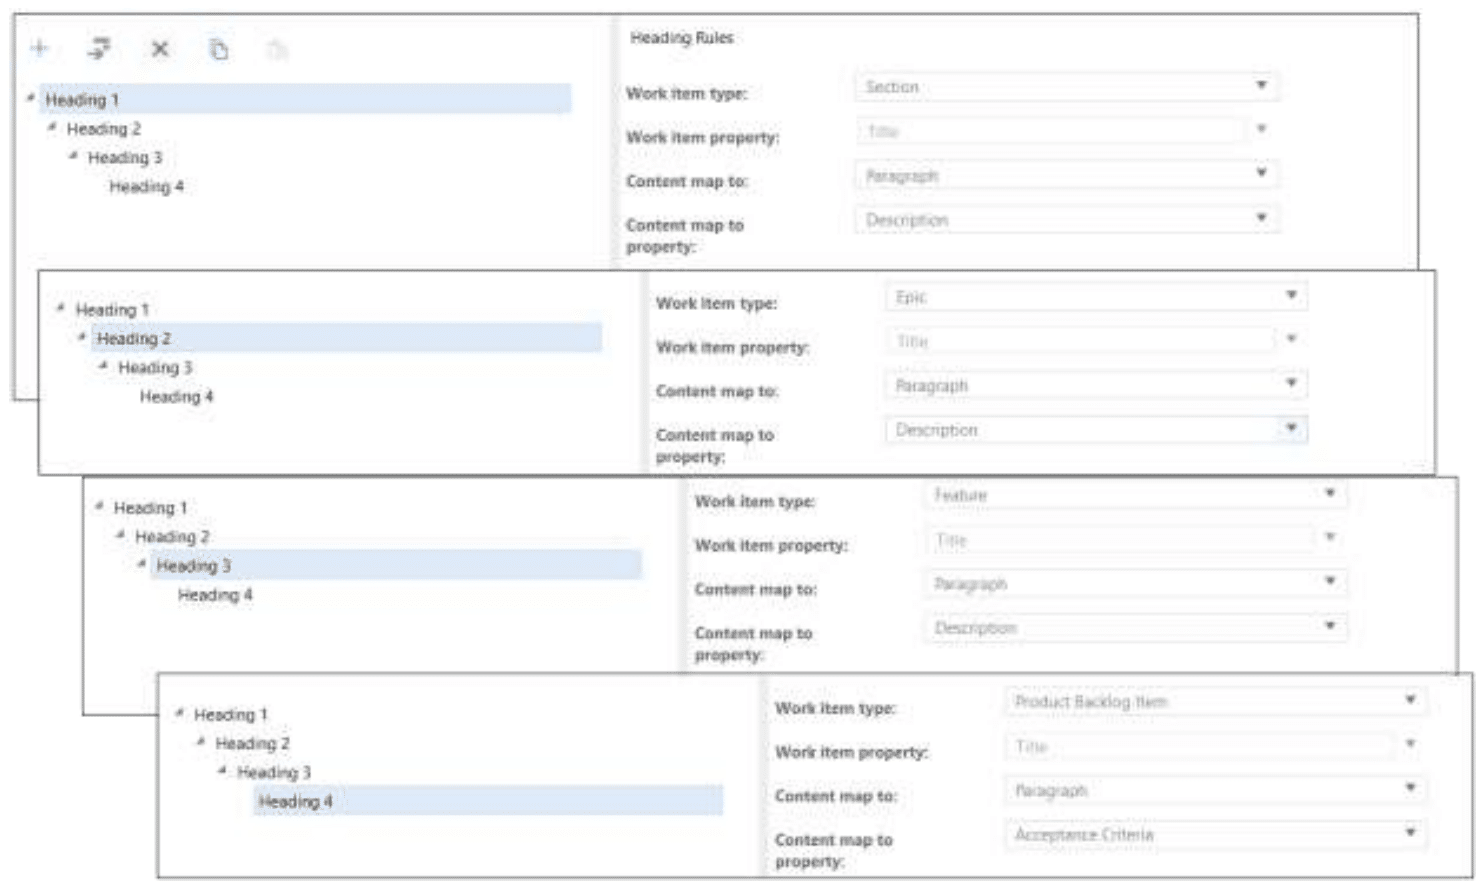 Example of Mapping Configuration from Ruleset Designer